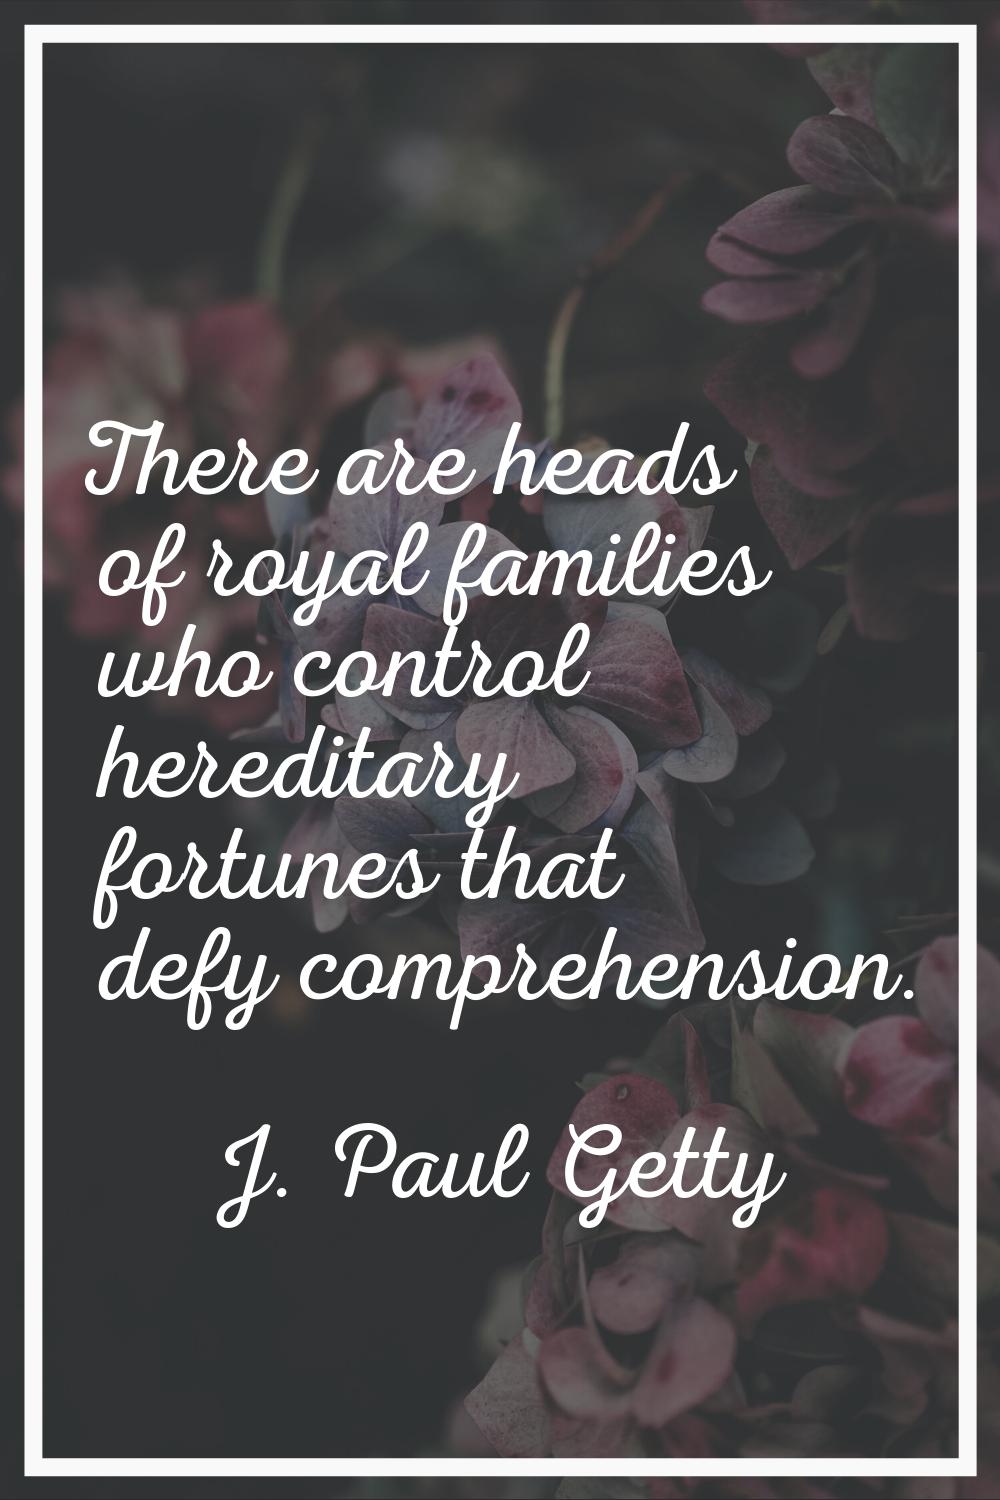 There are heads of royal families who control hereditary fortunes that defy comprehension.